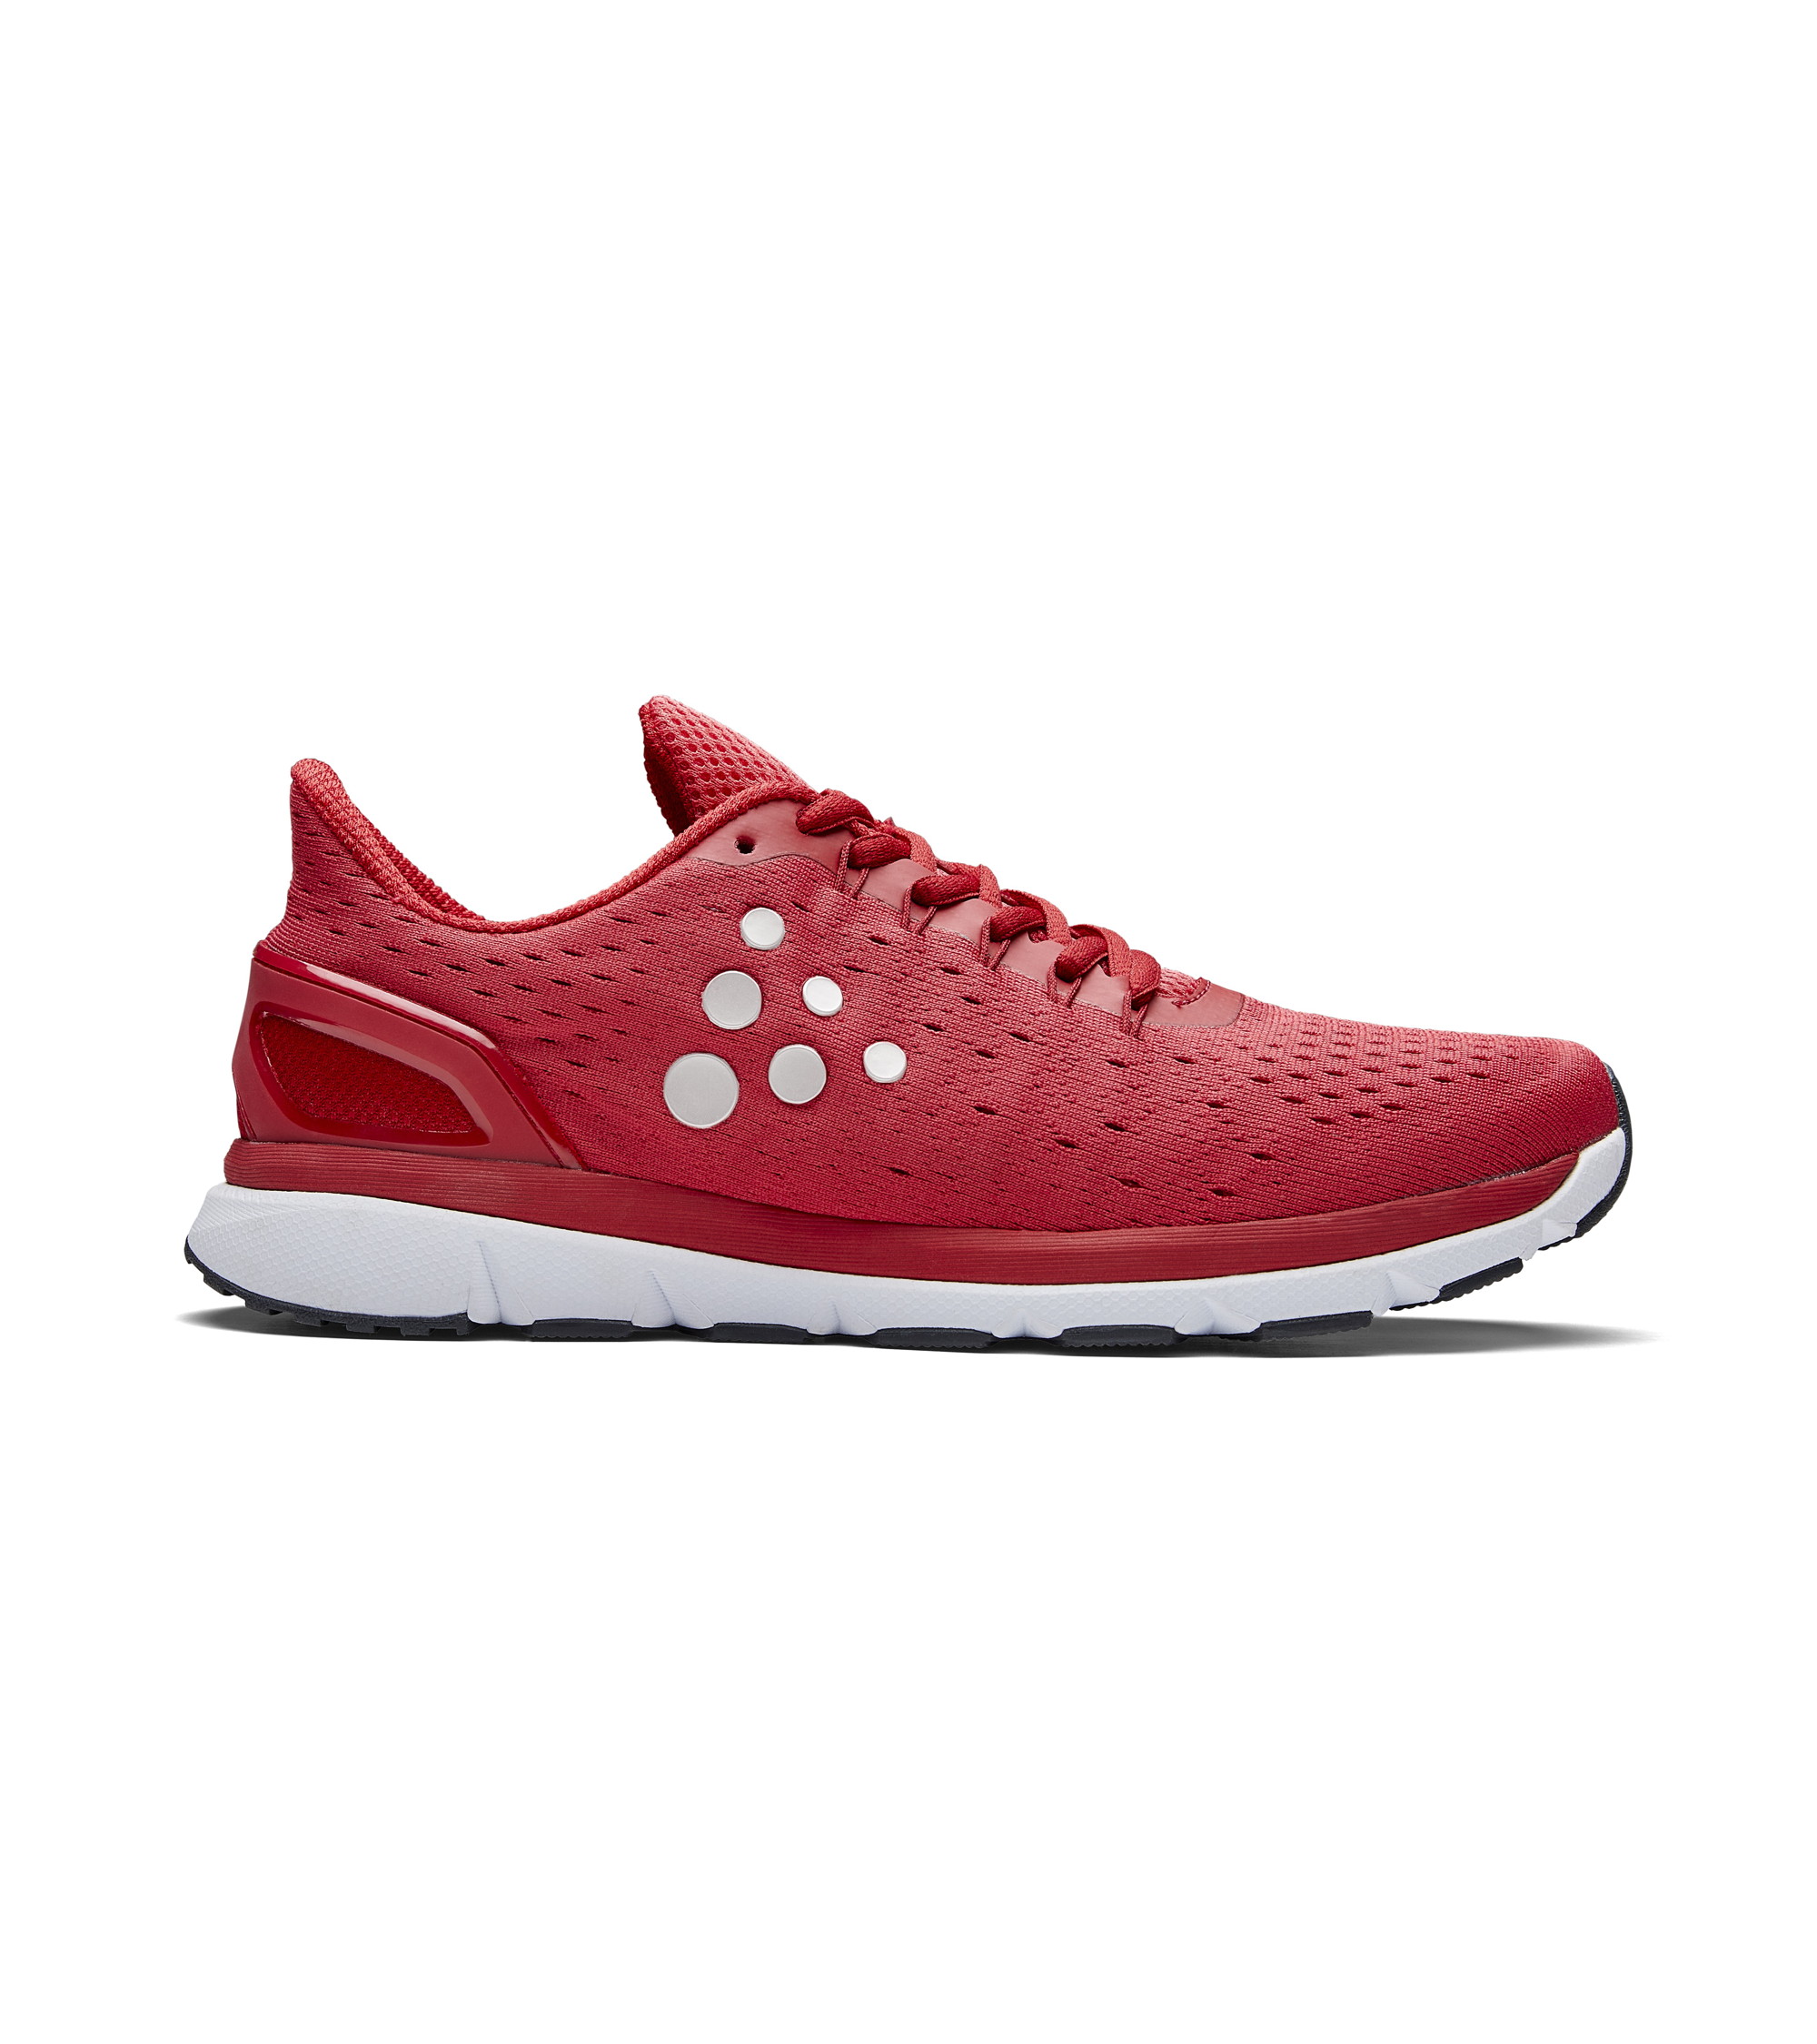 CRAFT Chaussures de running V150 ENGINEERED LADY Bright Red